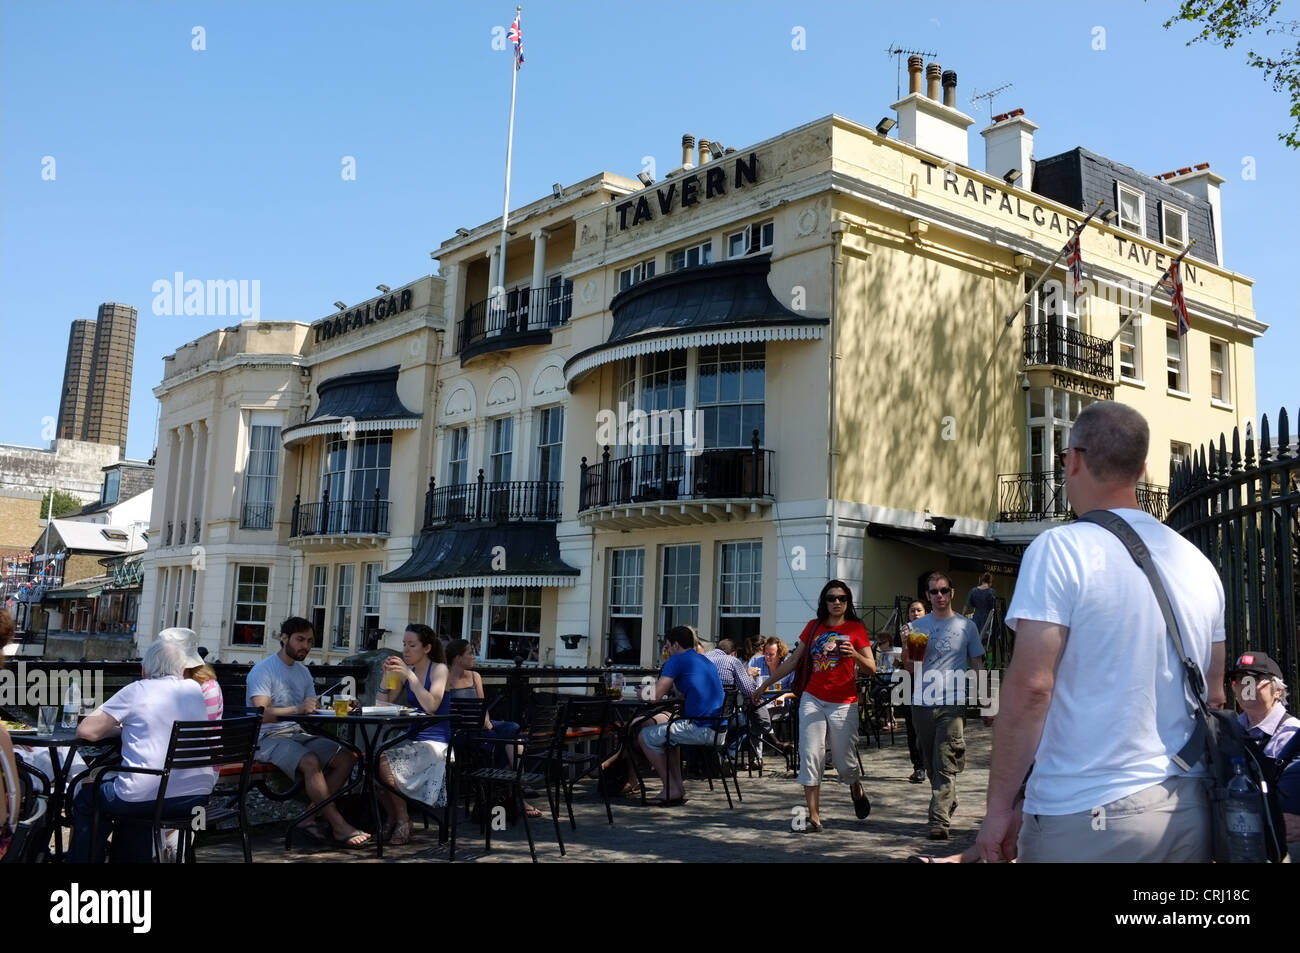 A summers day outside the Trafalgar Tavern in Greenwich, London UK Stock Photo